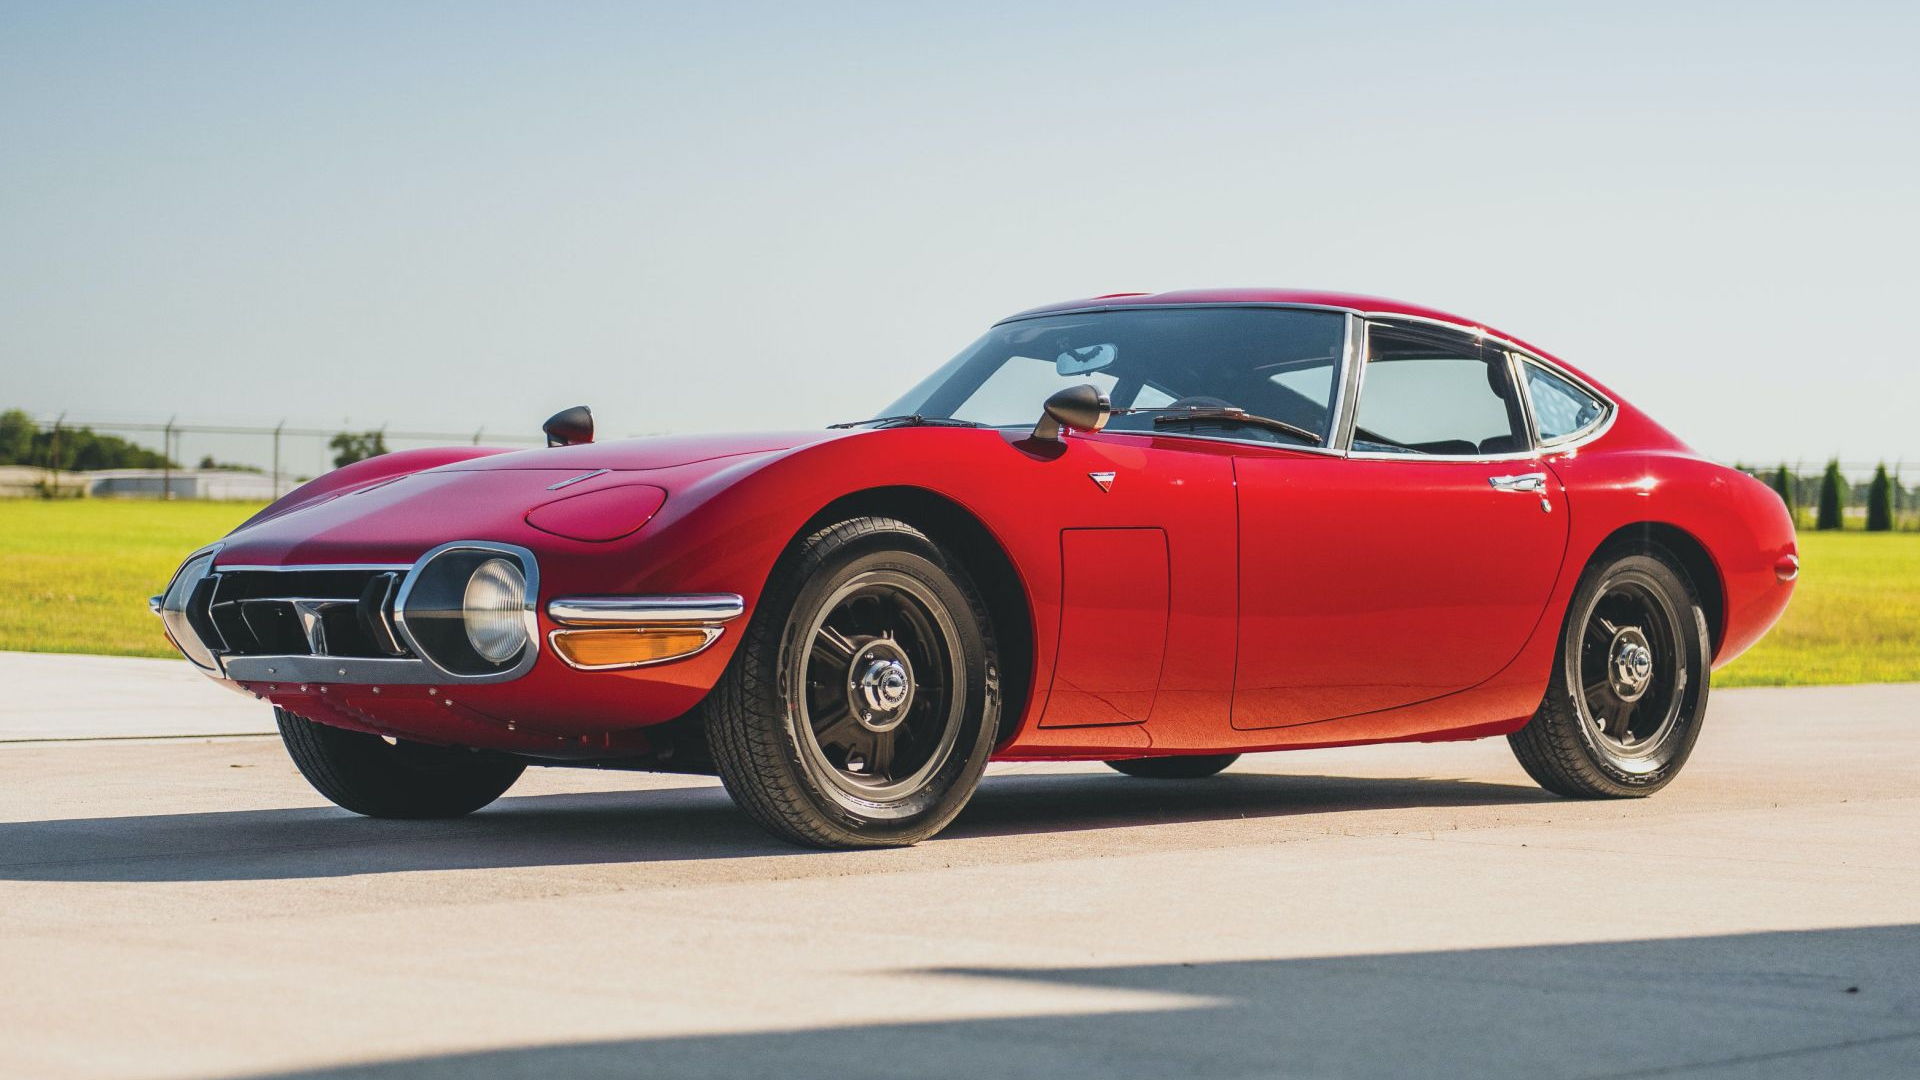 1967 Toyota 2000GT chassis no. MF10-10100  - Photo credit: Darin Schnabel/RM Sotheby's